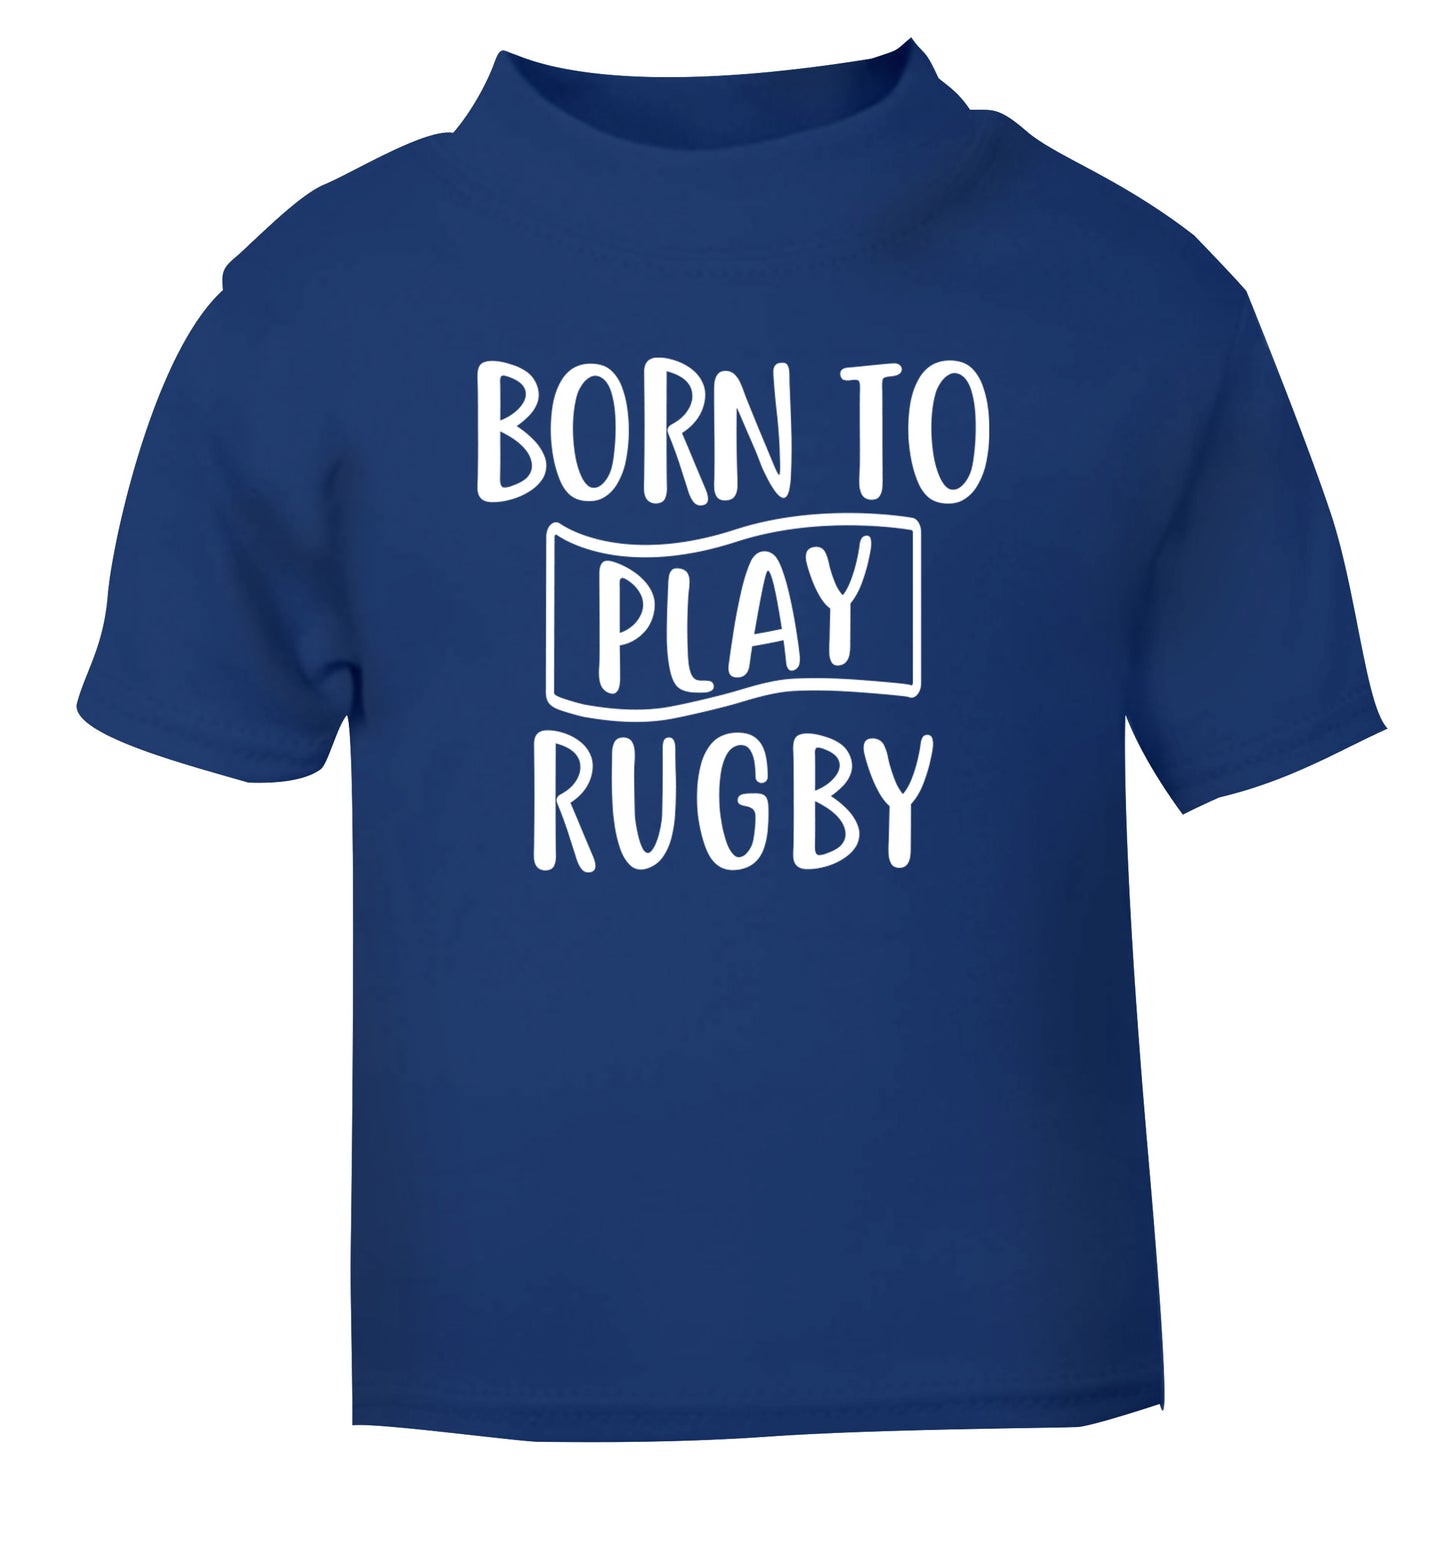 Born to play rugby blue Baby Toddler Tshirt 2 Years